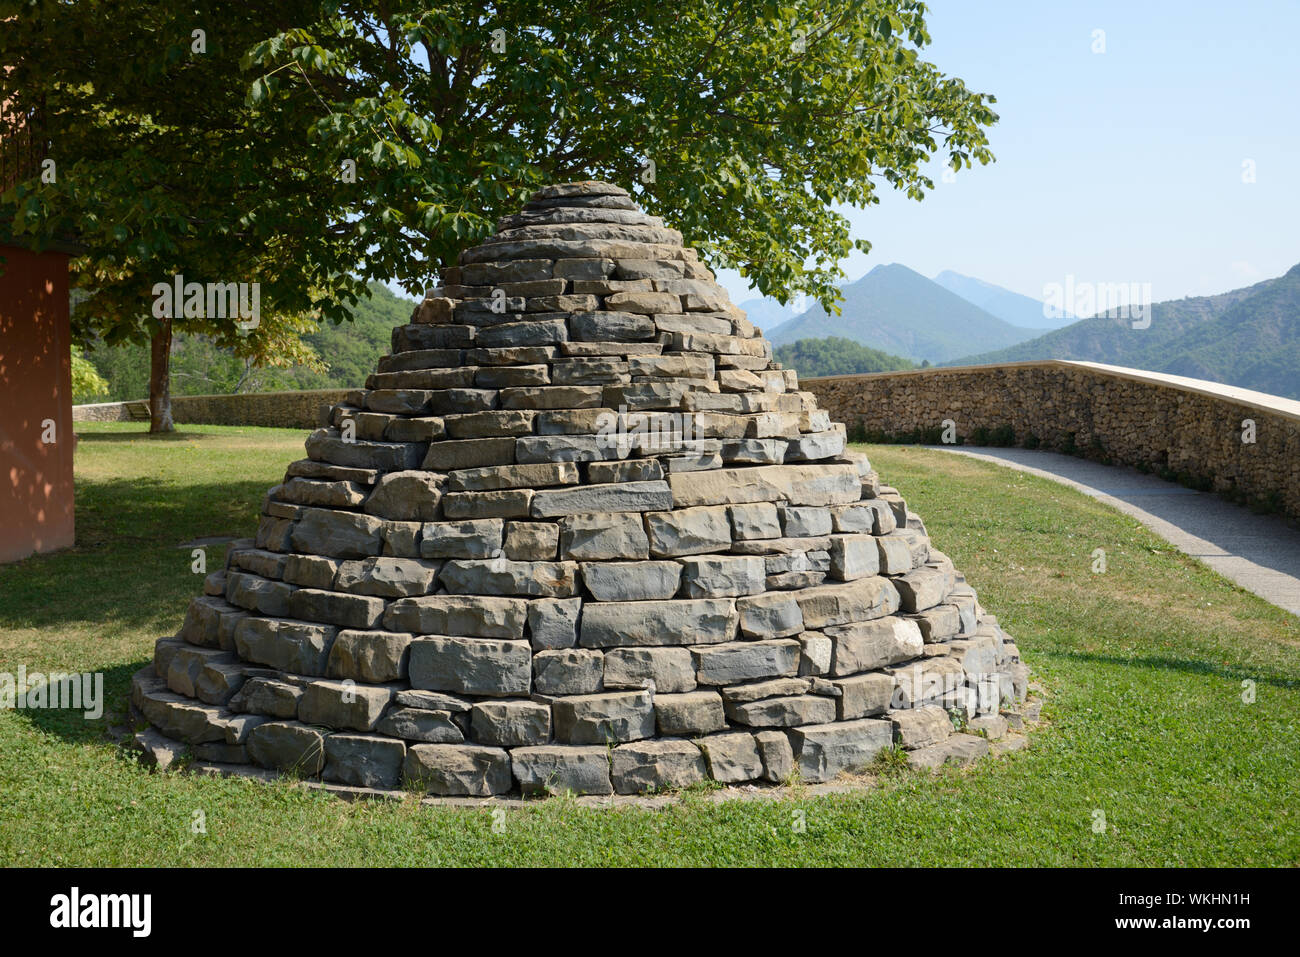 Land Art or Art Installation. Cairn by Andy Golsworthy in the Grounds or Garden of the Musée Promenade Park & Museum Digne-les-Bains Provence France Stock Photo